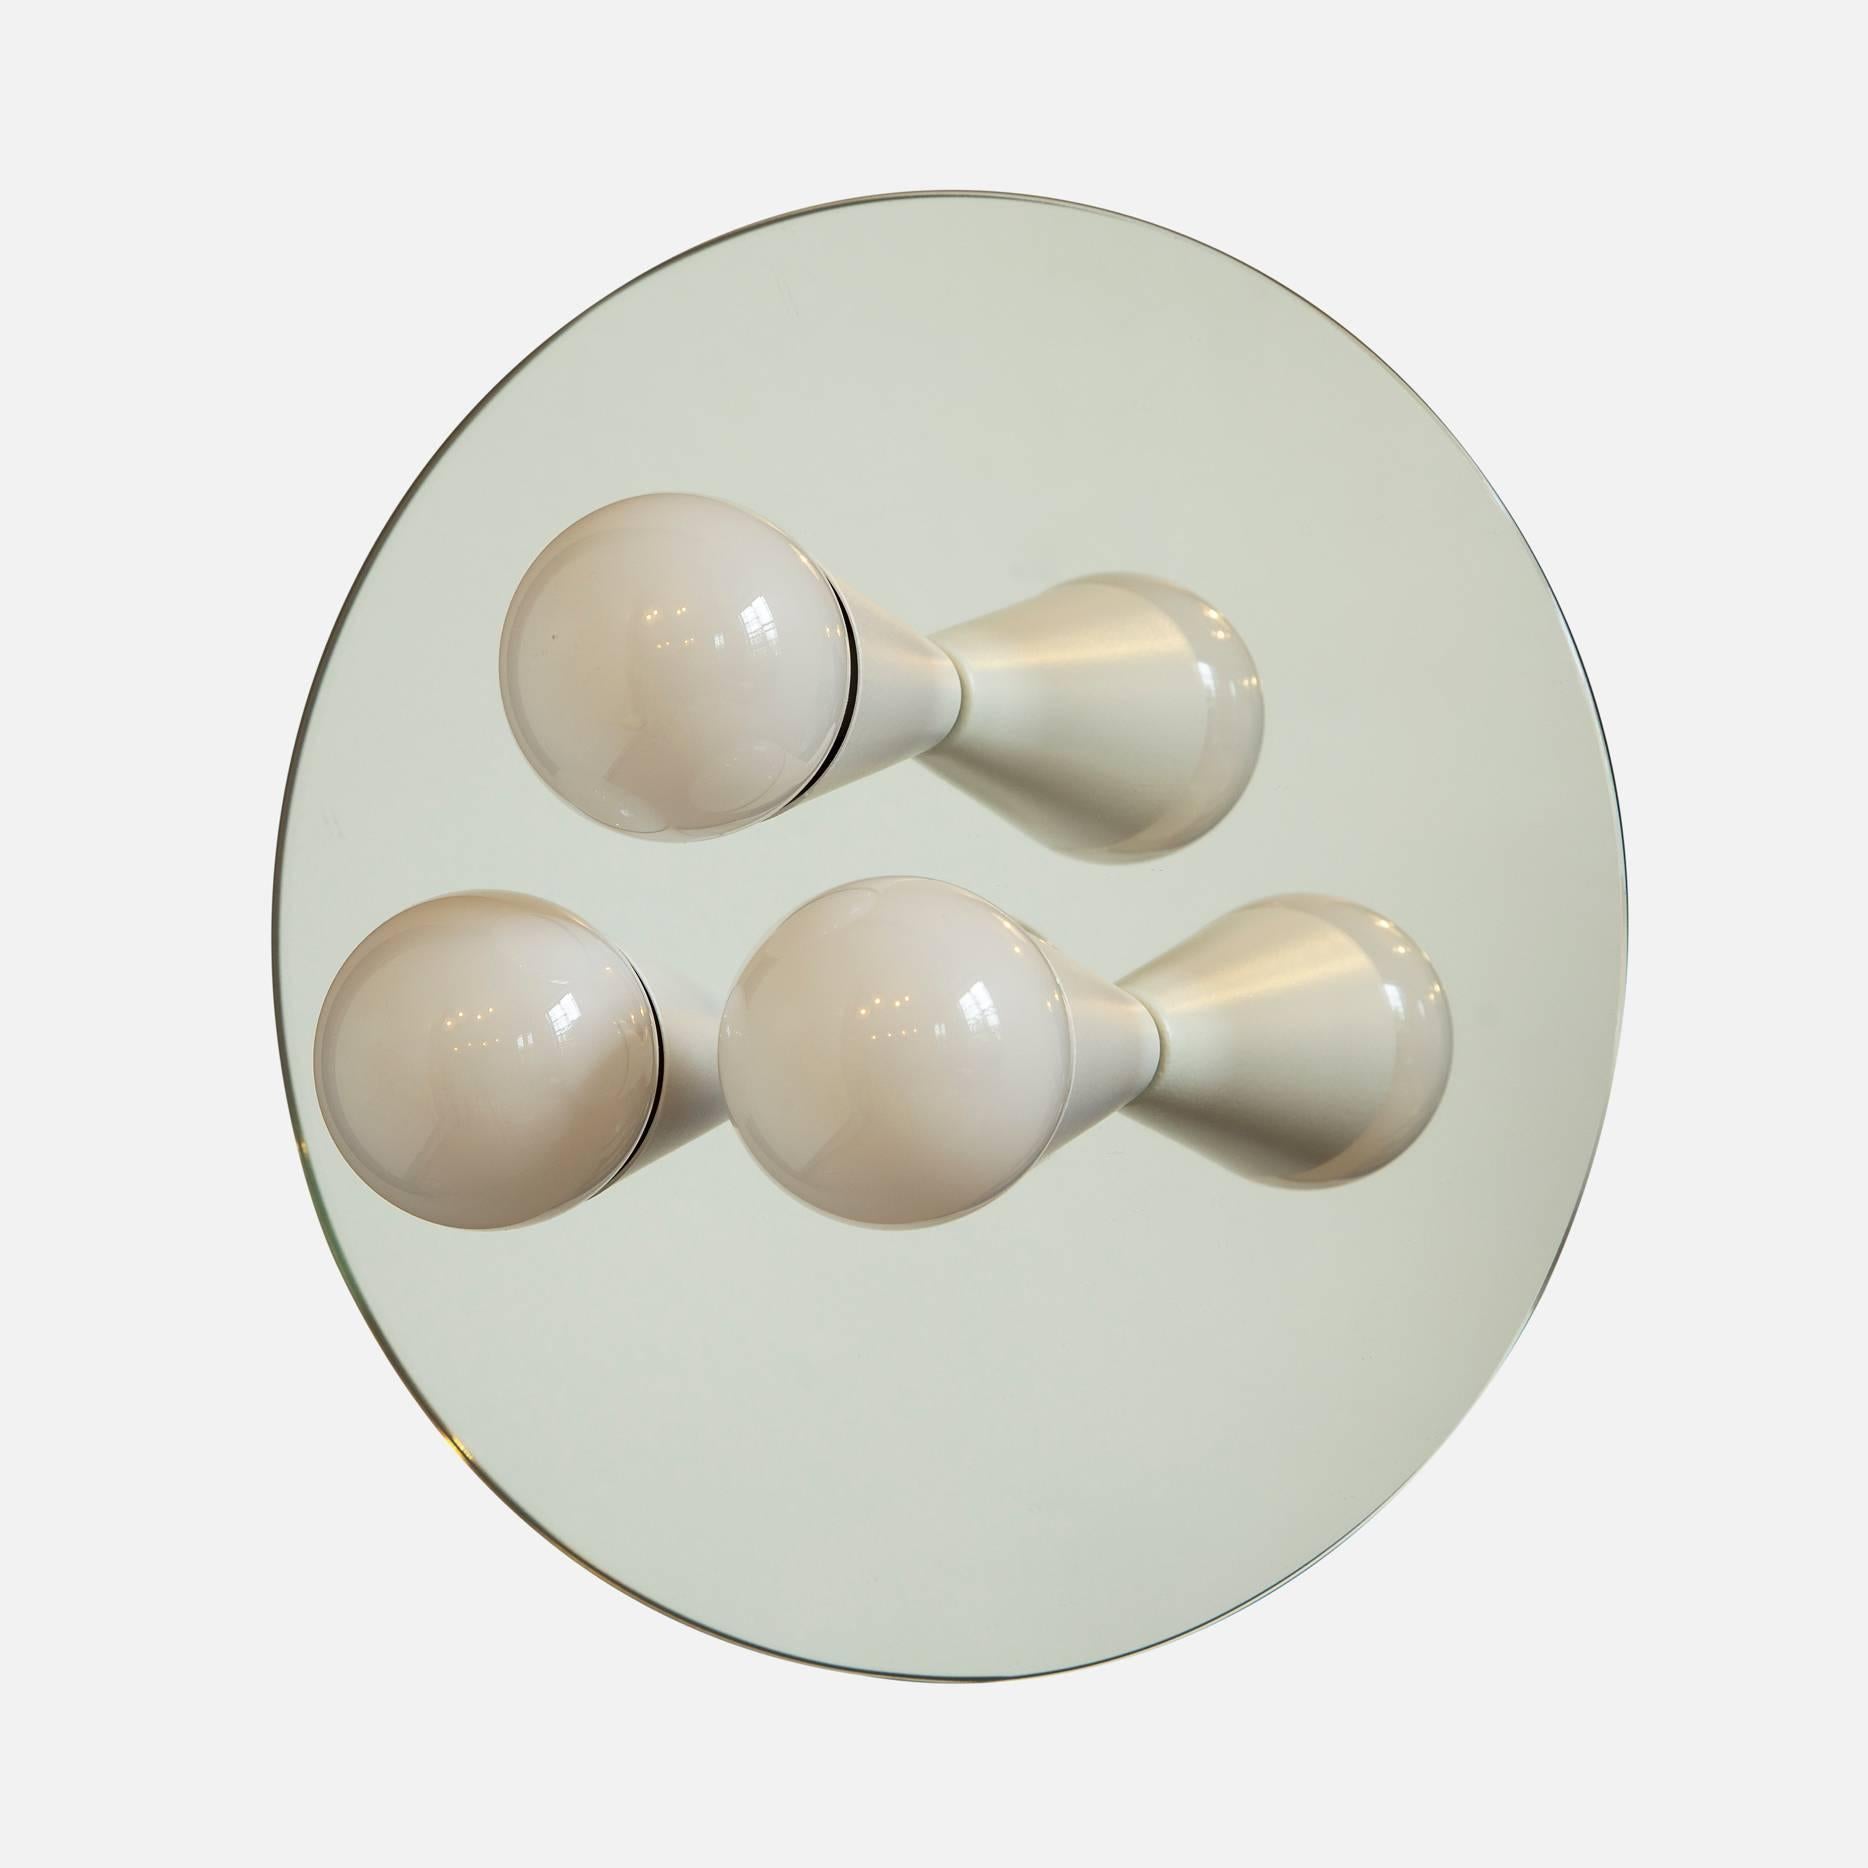 Simple, elegant and playful, the Echo Series is a line of surface-mount fixtures that can be used on a wall or ceiling. White or brass cones mount to mirrored glass to perfectly reflect each bulb, giving the illusion of lights floating in